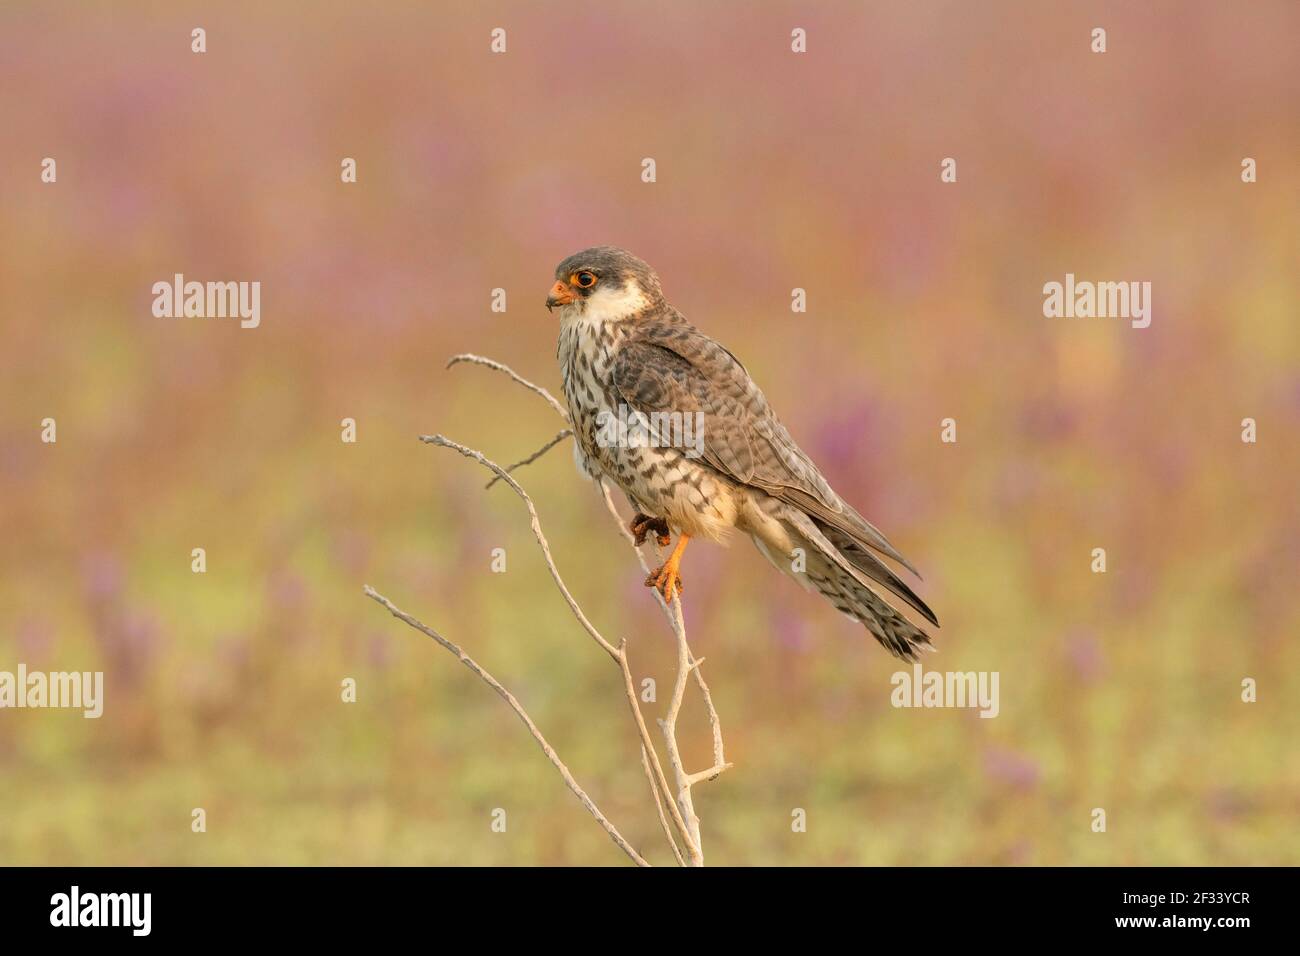 Amur Falcon, Falco amurensis, Female, Pune. The females are duller gray and their white underparts are well marked with dark chevrons Stock Photo